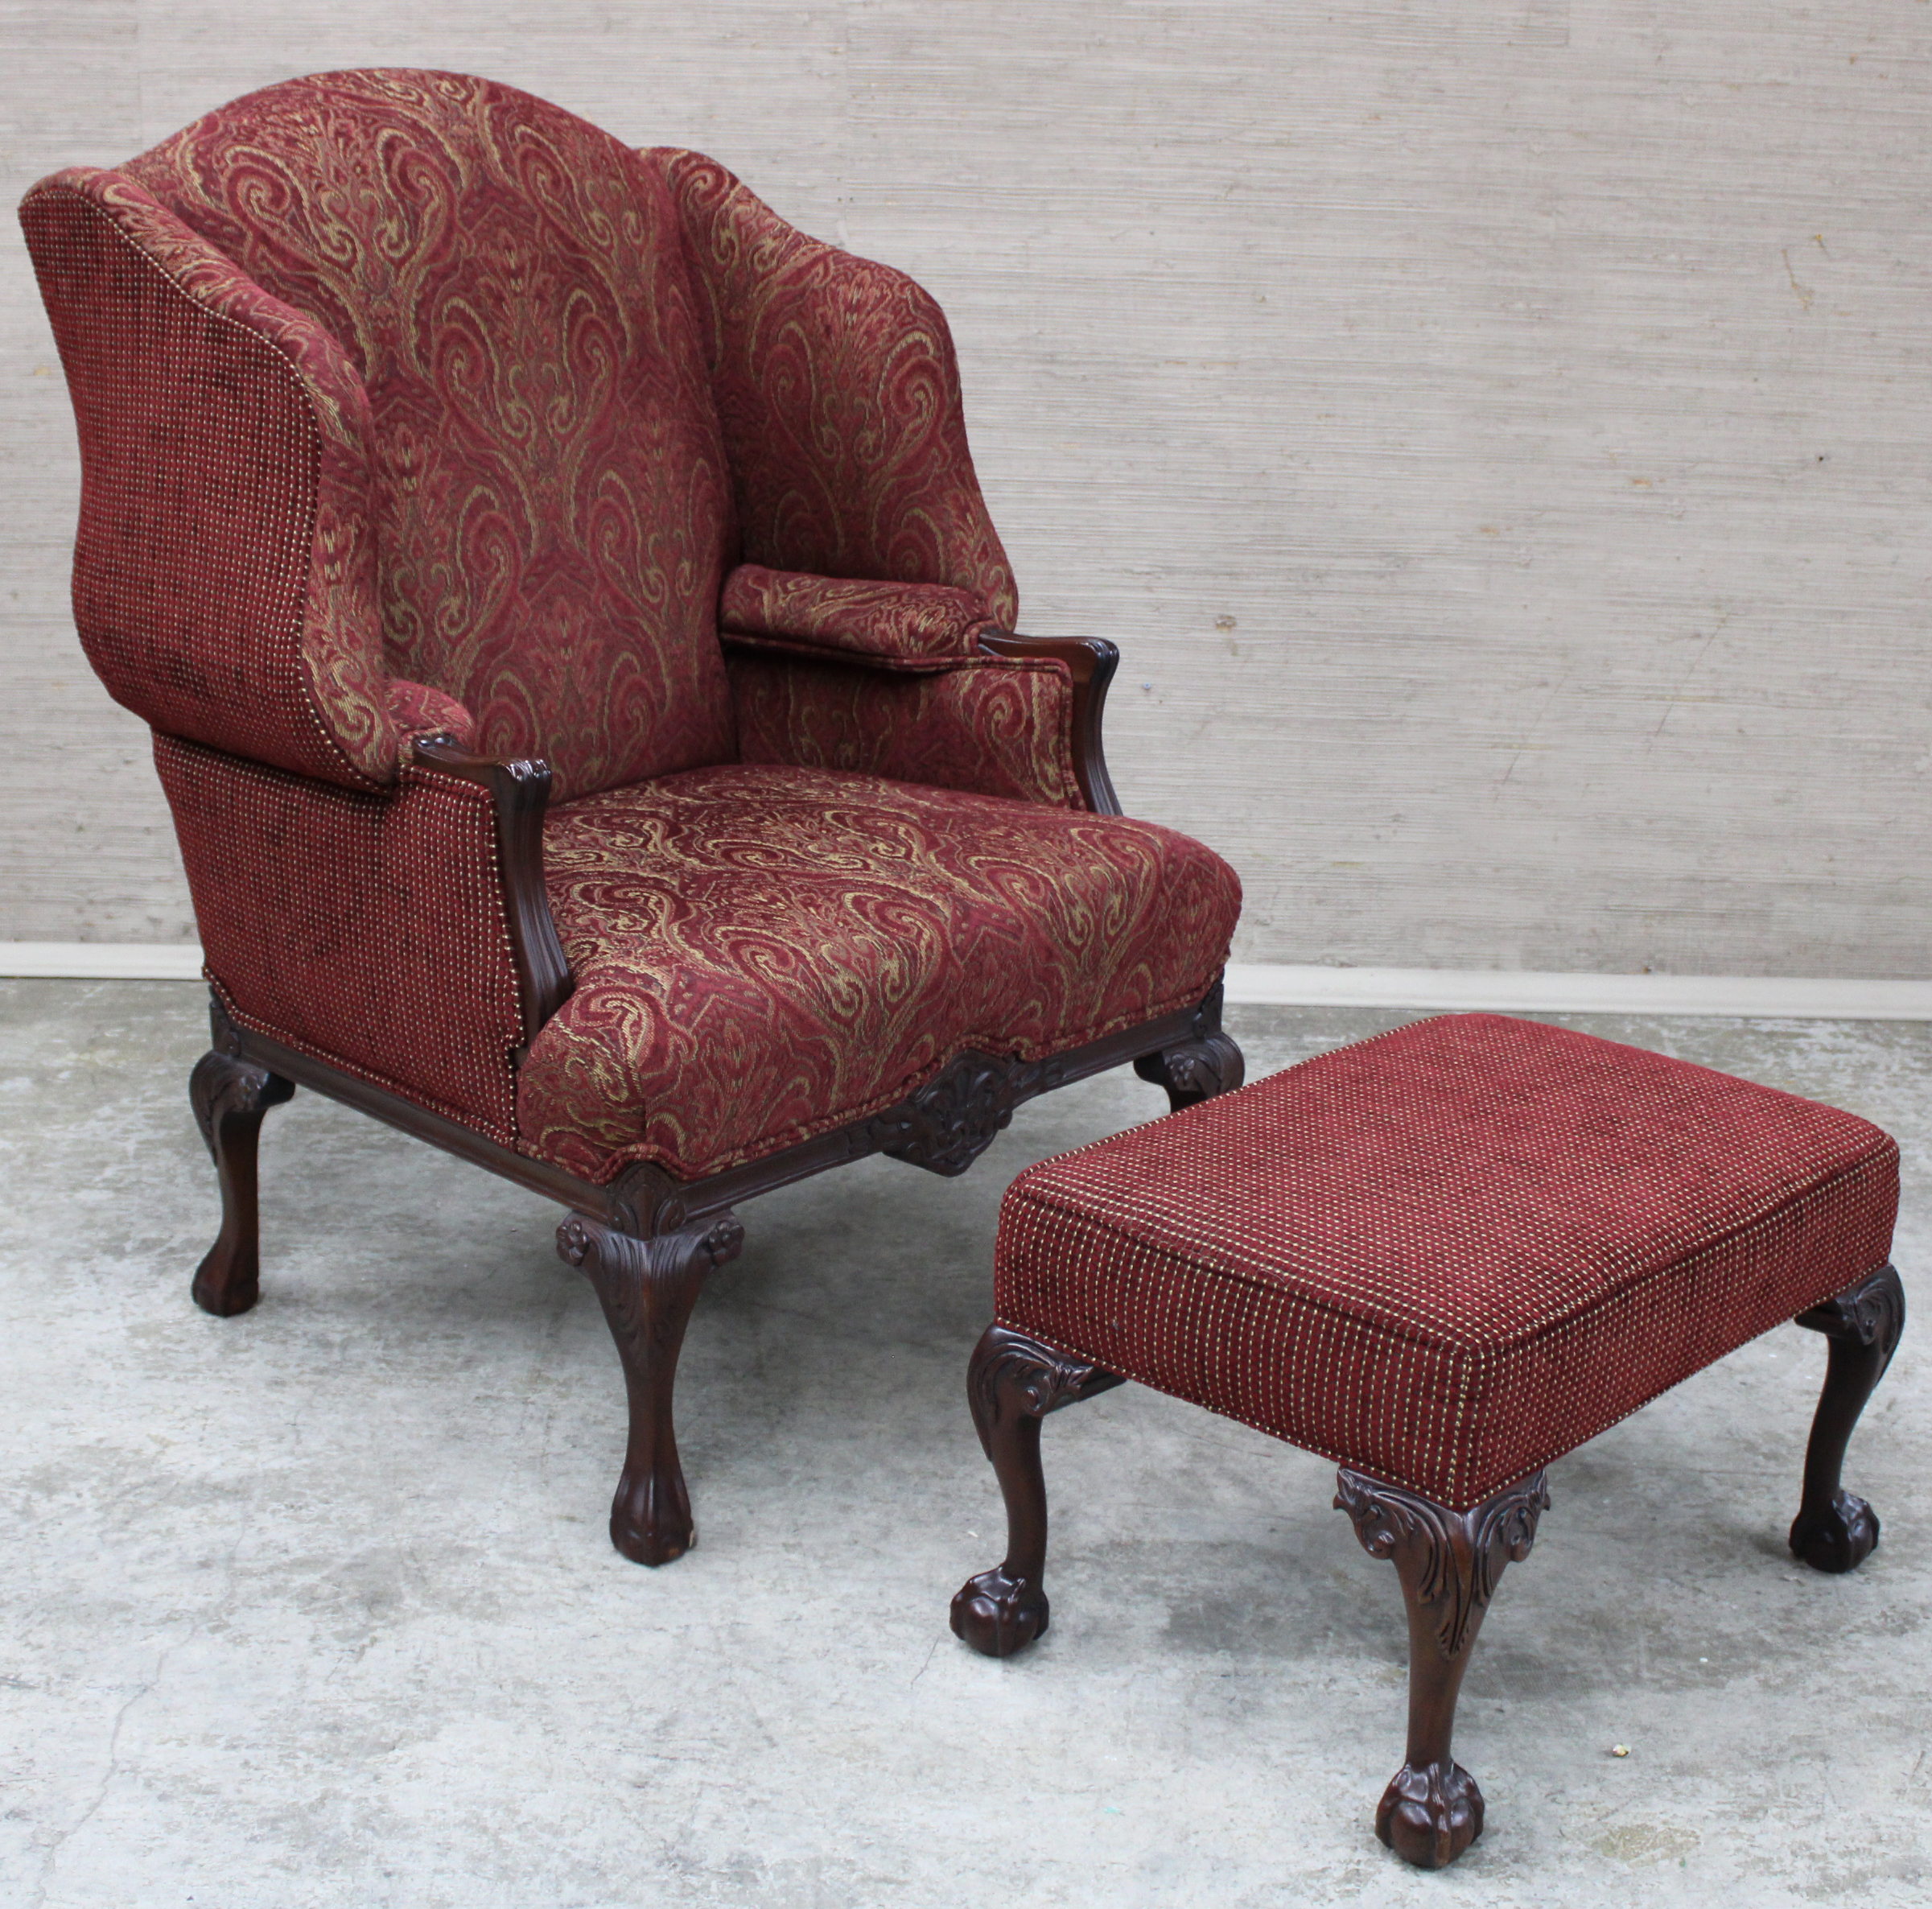 CHIPPENDALE STYLE WING CHAIR AND 2c895e